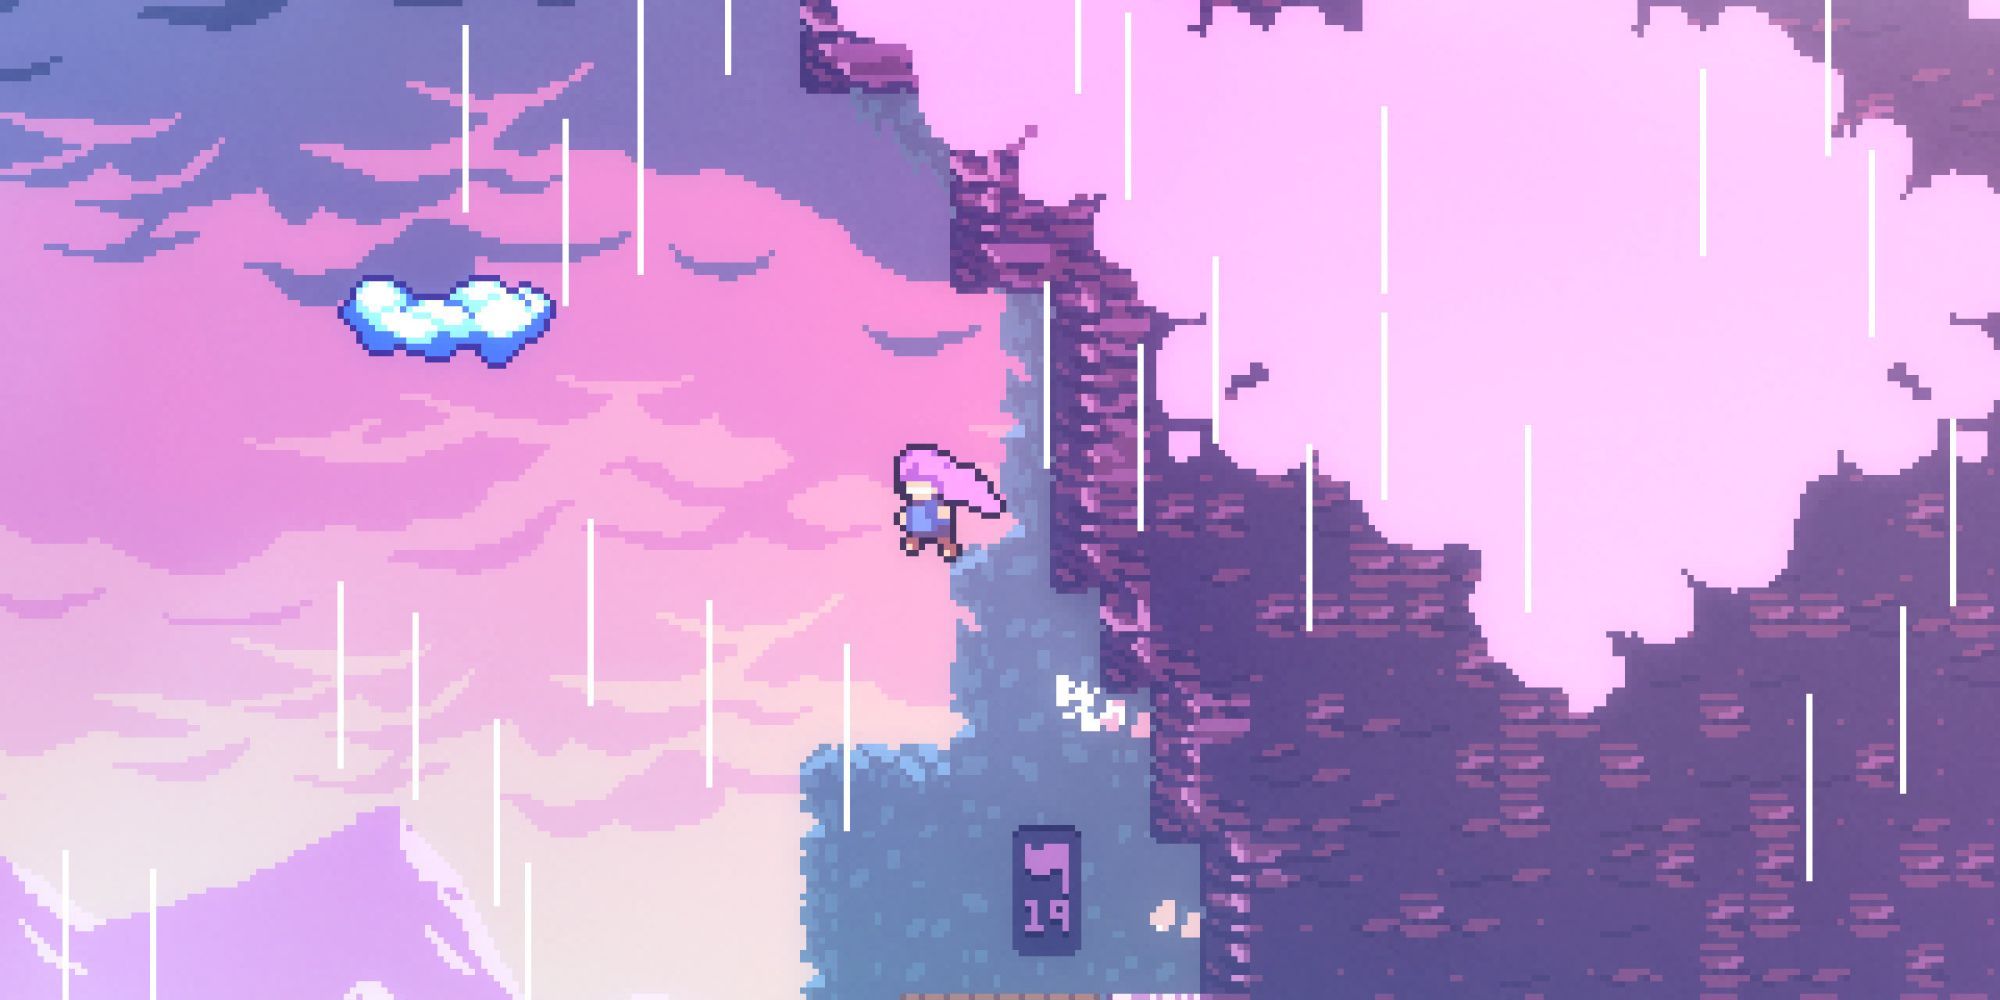 Madeline jumps away from a mountain while it rains